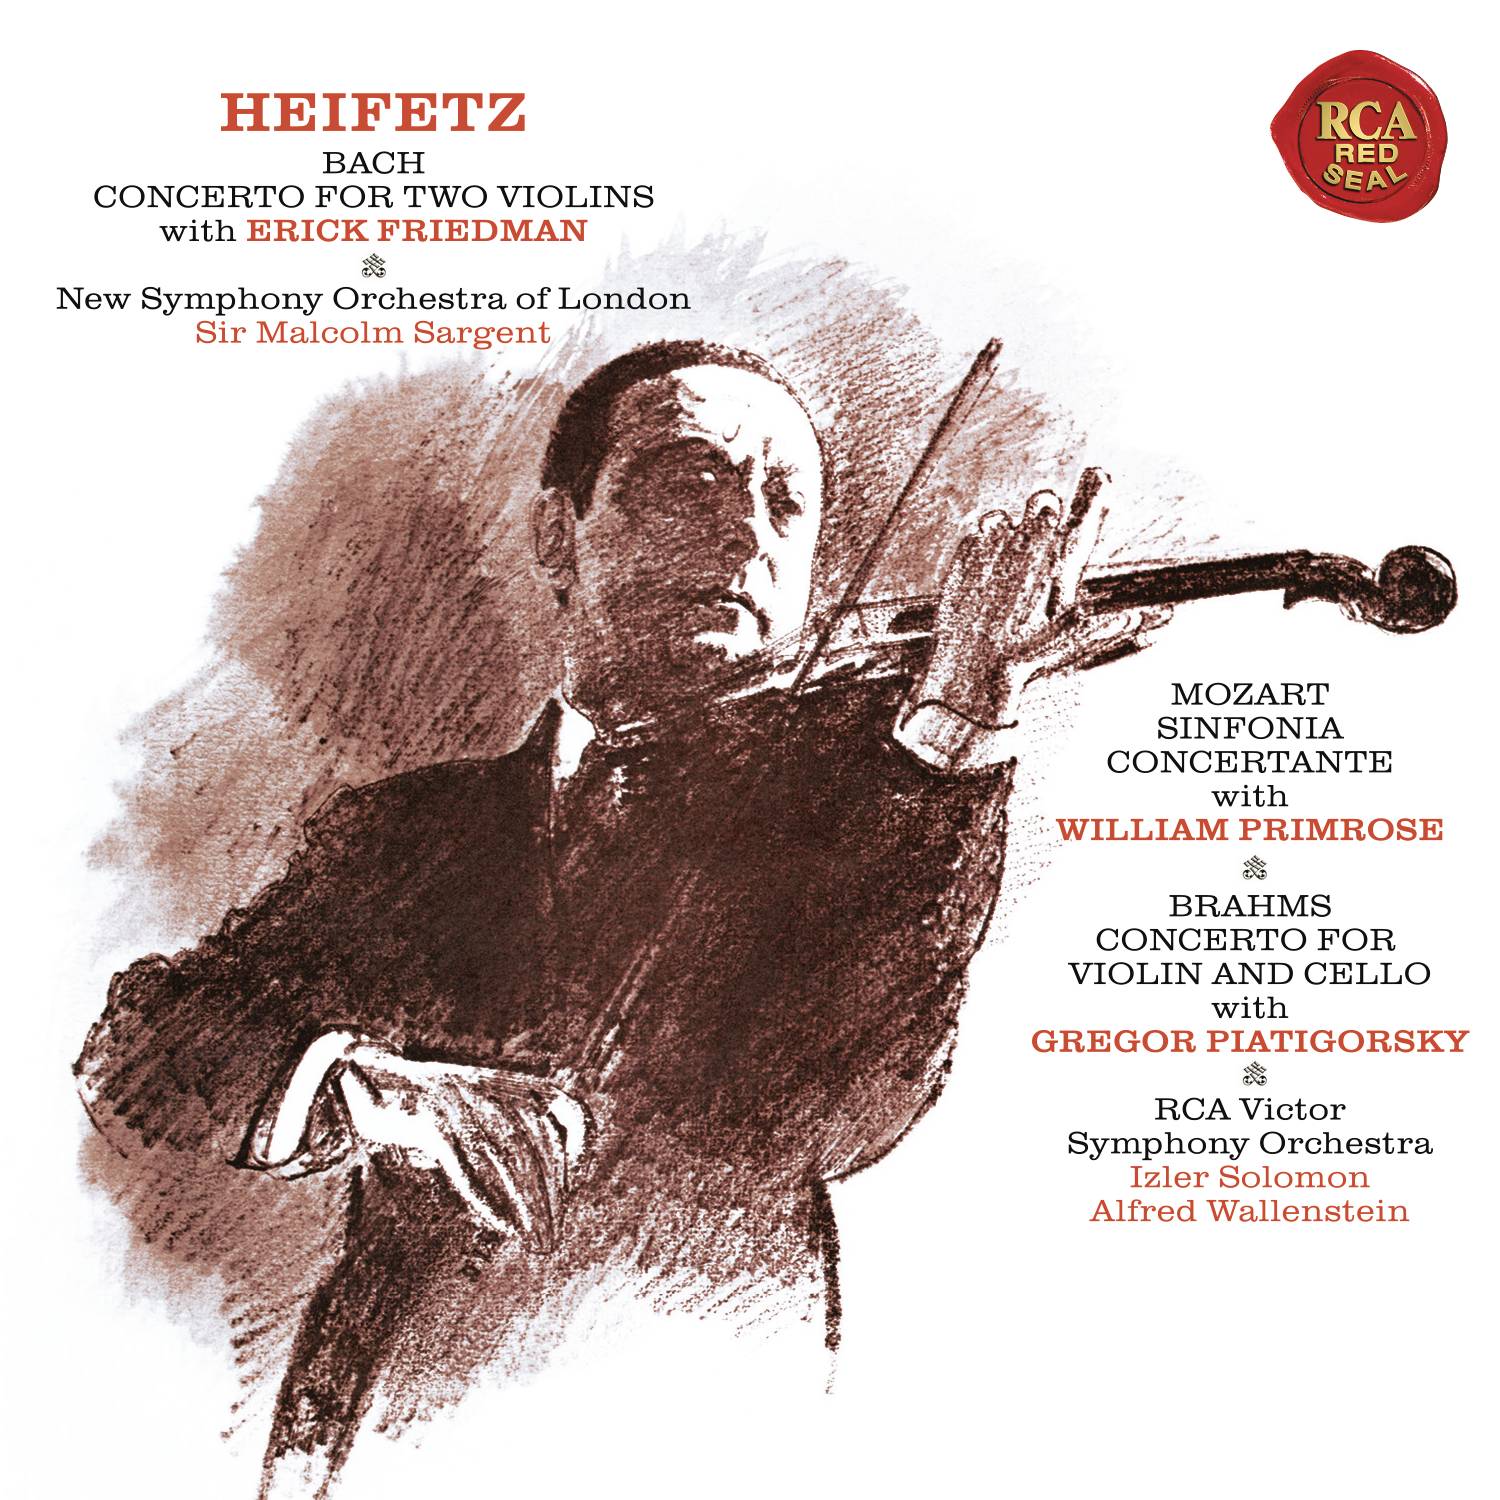 Bach: Concerto in D Minor for Two Violins, BWV 1043 - Mozart: Sinfonia concertante in E-Flat Major, K. 364 - Brahms: Concerto in A Minor for Violin and Cello, Op. 102 - Heifetz Remastered